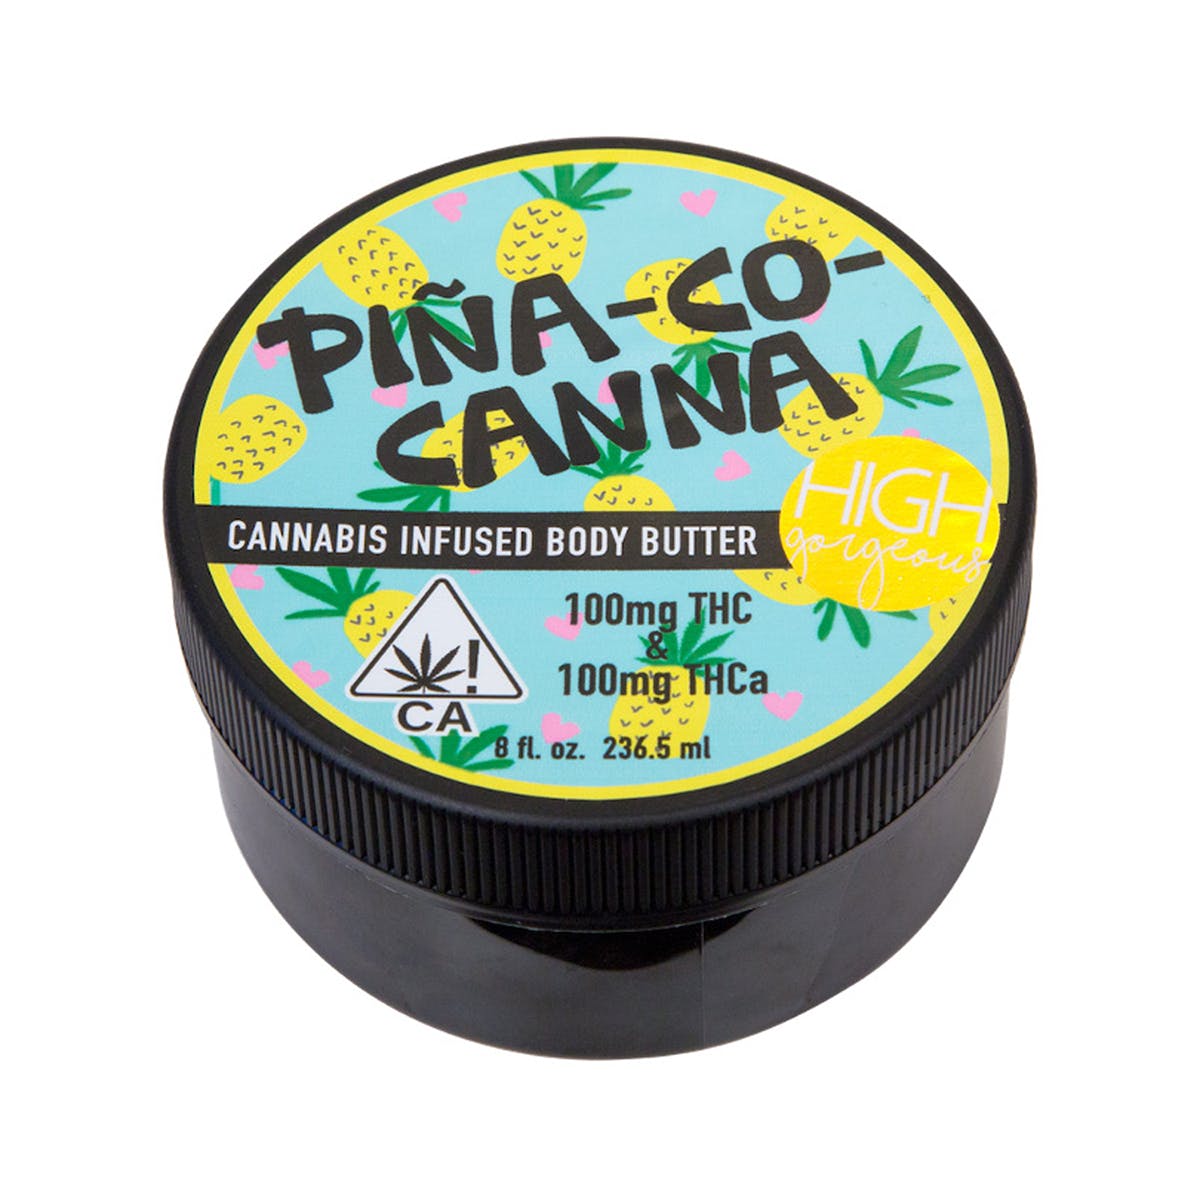 Pina-co-canna Body Butter, 200mg THC